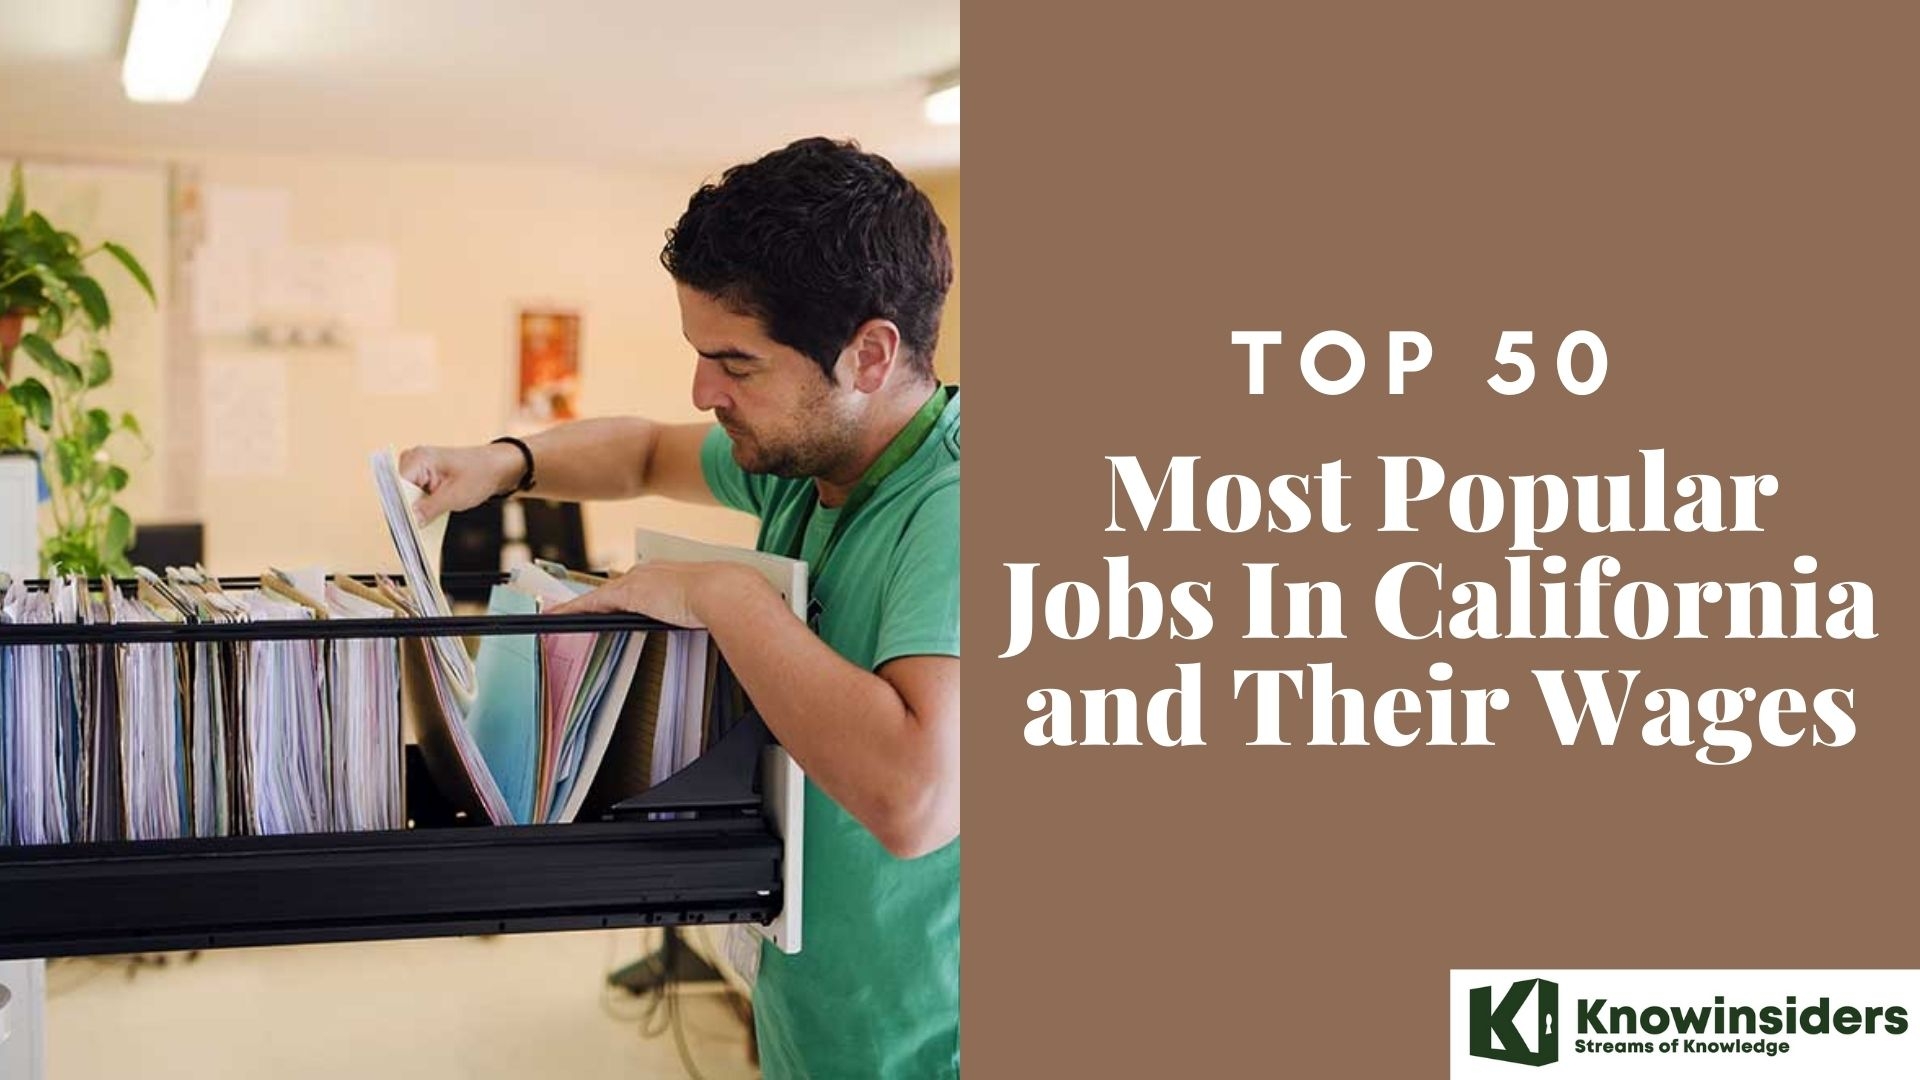 How to Get a Job in California - Top 50 Most Popular Jobs and Their Wages